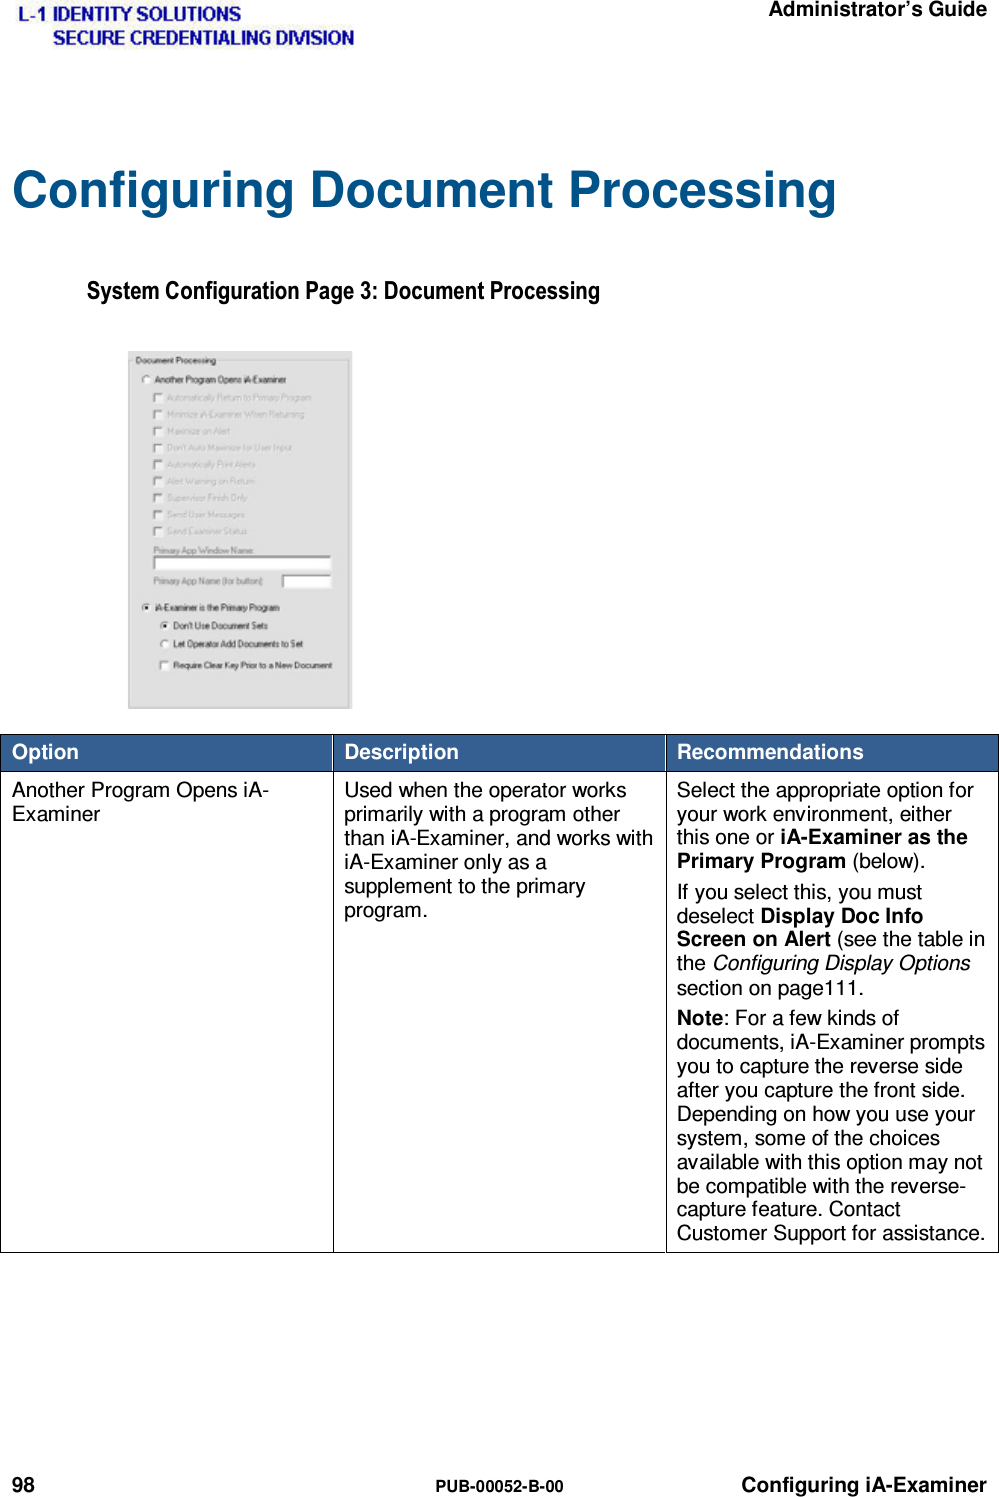   Administrator’s Guide 98  PUB-00052-B-00 Configuring iA-Examiner Configuring Document Processing 6\VWHP&amp;RQILJXUDWLRQ3DJH&apos;RFXPHQW3URFHVVLQJOption  Description  Recommendations Another Program Opens iA-Examiner Used when the operator works primarily with a program other than iA-Examiner, and works with iA-Examiner only as a supplement to the primary program. Select the appropriate option for your work environment, either this one or iA-Examiner as the Primary Program (below). If you select this, you must deselect Display Doc Info Screen on Alert (see the table in the Configuring Display Options section on page111. Note: For a few kinds of documents, iA-Examiner prompts you to capture the reverse side after you capture the front side. Depending on how you use your system, some of the choices available with this option may not be compatible with the reverse-capture feature. Contact Customer Support for assistance.   